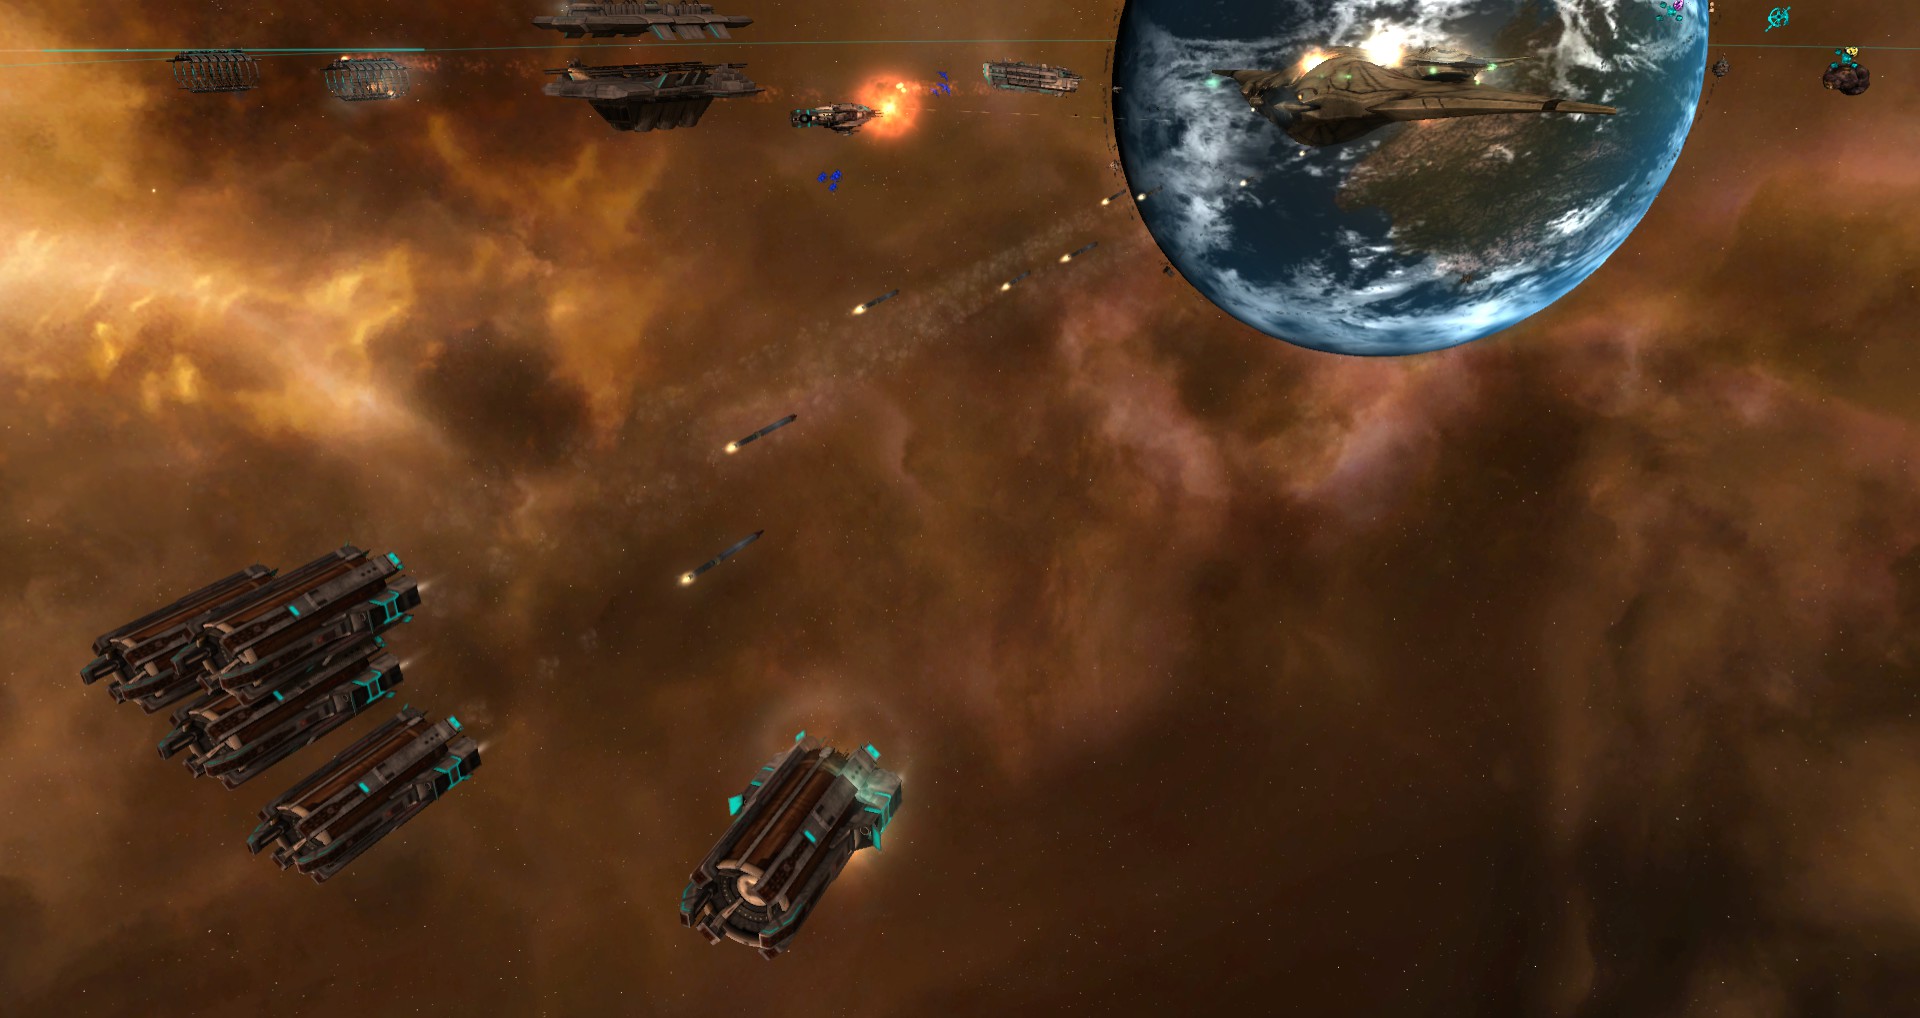 Sins of a solar empire ultimate edition 1.84 patch download torrent